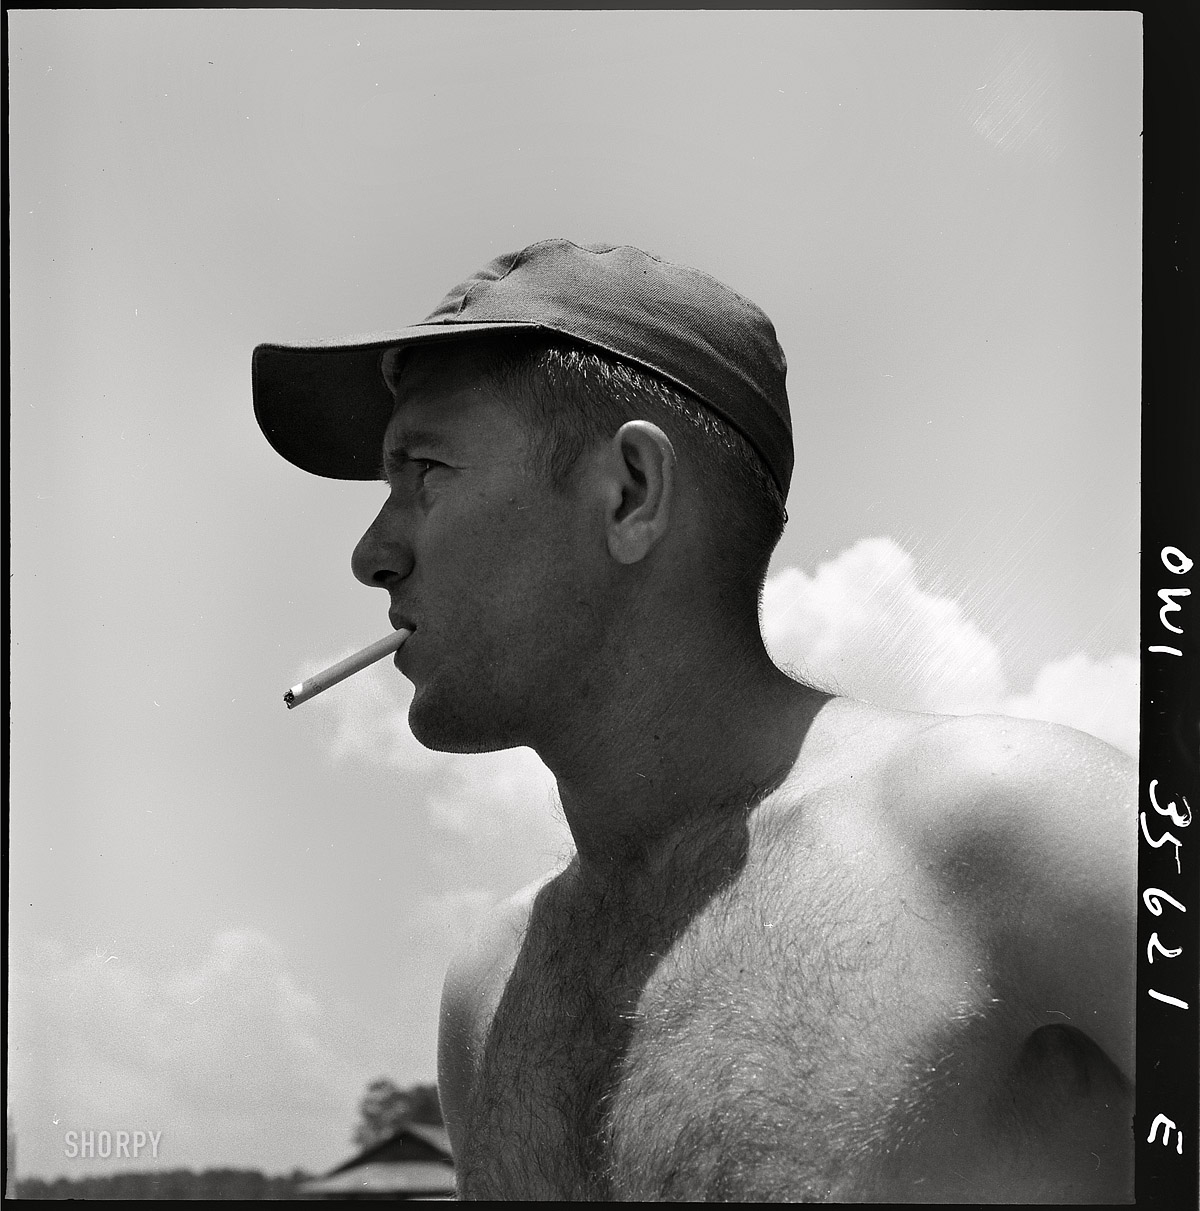 July 1943. "Myrtle Beach, S.C. Air Service Command. Mobile chief Technical Sergeant Vasile Choken, whose home is in Akron, Ohio. In civilian life he drove a truck, ran a filling station and spent two years in the Civilian Conservation Corps." Photo by Jack Delano for the Office of War Information. View full size.